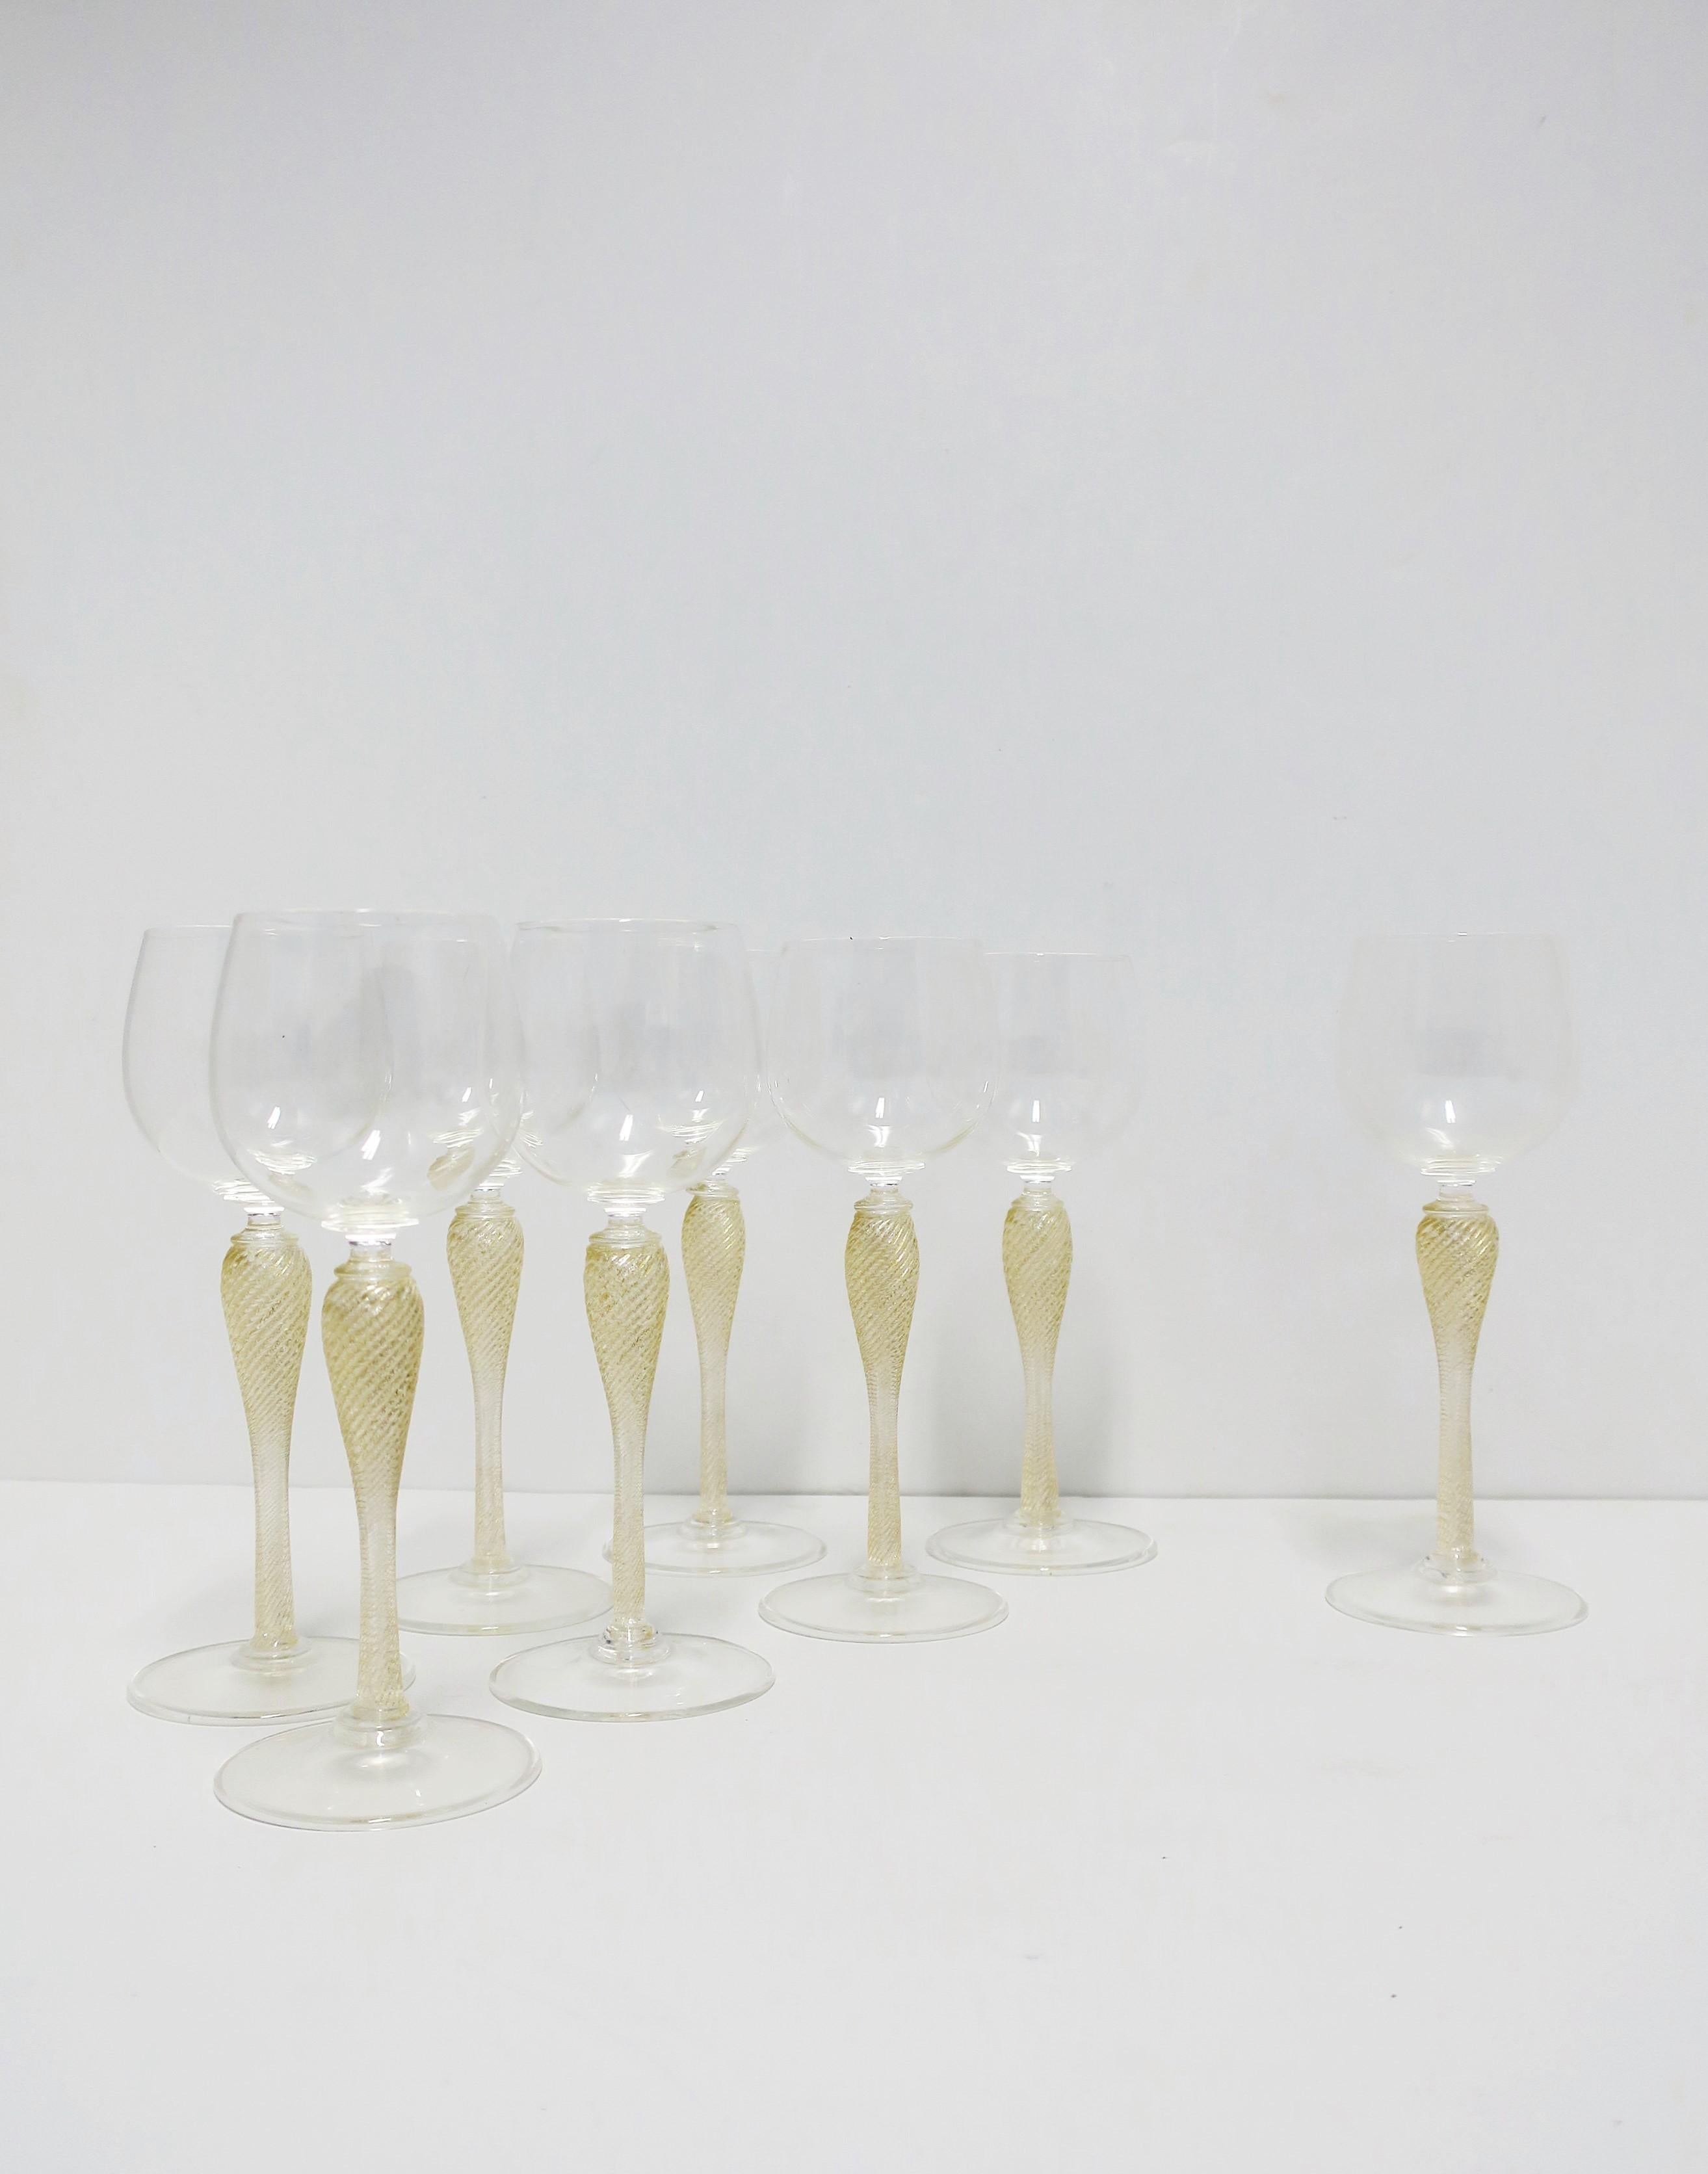 A beautiful set of eight (8) Italian Venetian Murano gold and transparent art glass wine, Champagne or cocktail glasses by Cenedese, circa late-20th century, Italy. Many types of drinks/cocktails/beverages can be enjoyed with these glasses. A